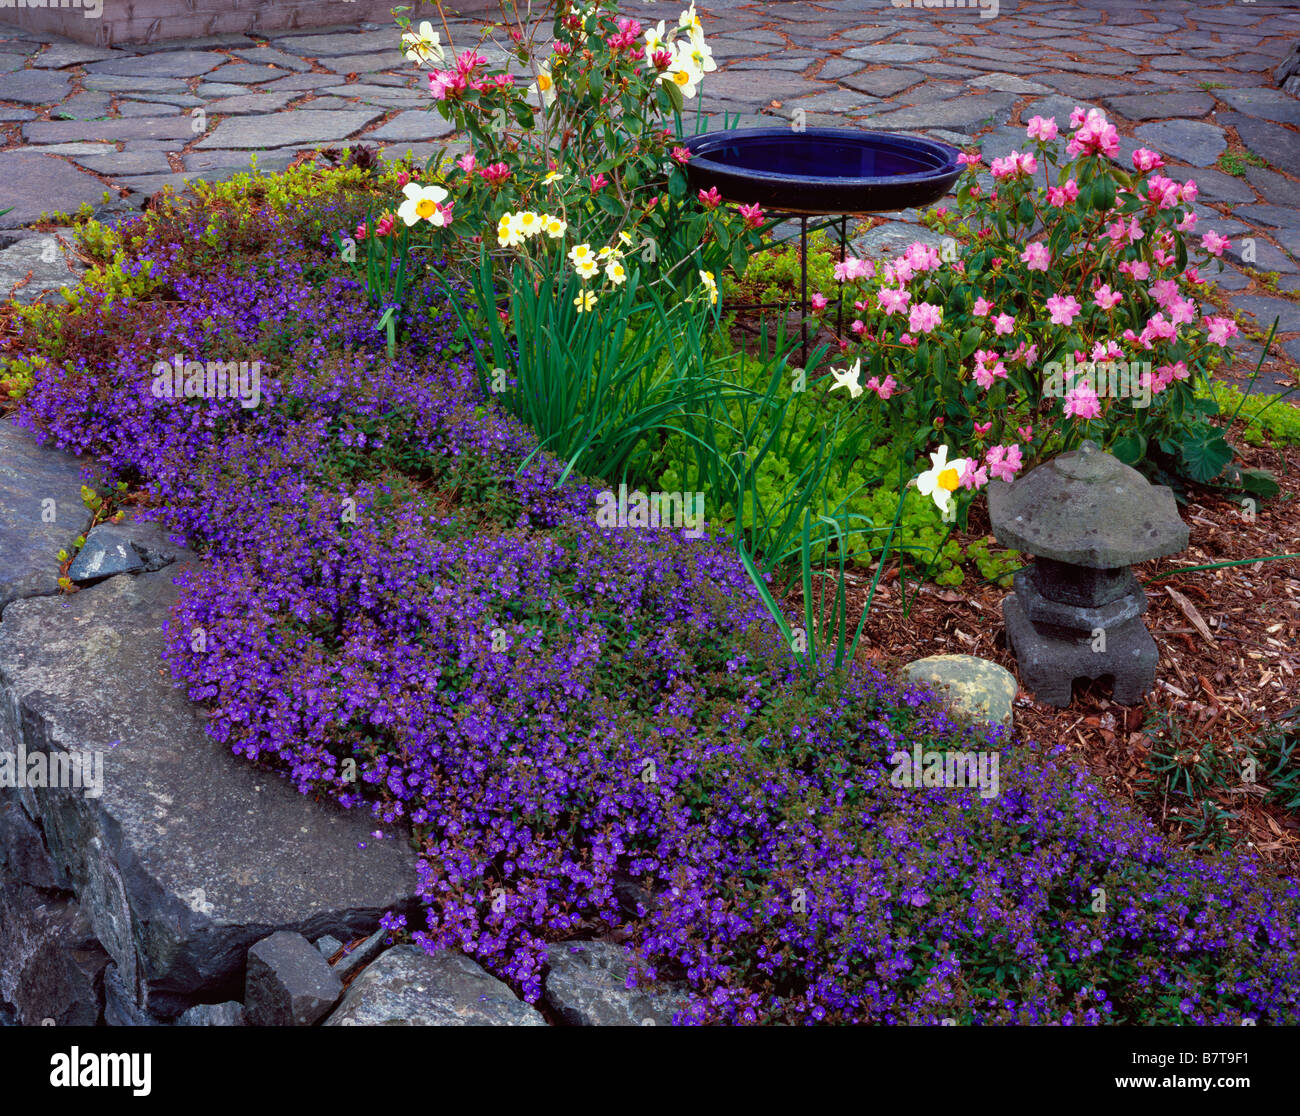 A blue bird bath rests among Pioneer pink rhododendrons narcissus blooms and purple Veronica Stock Photo